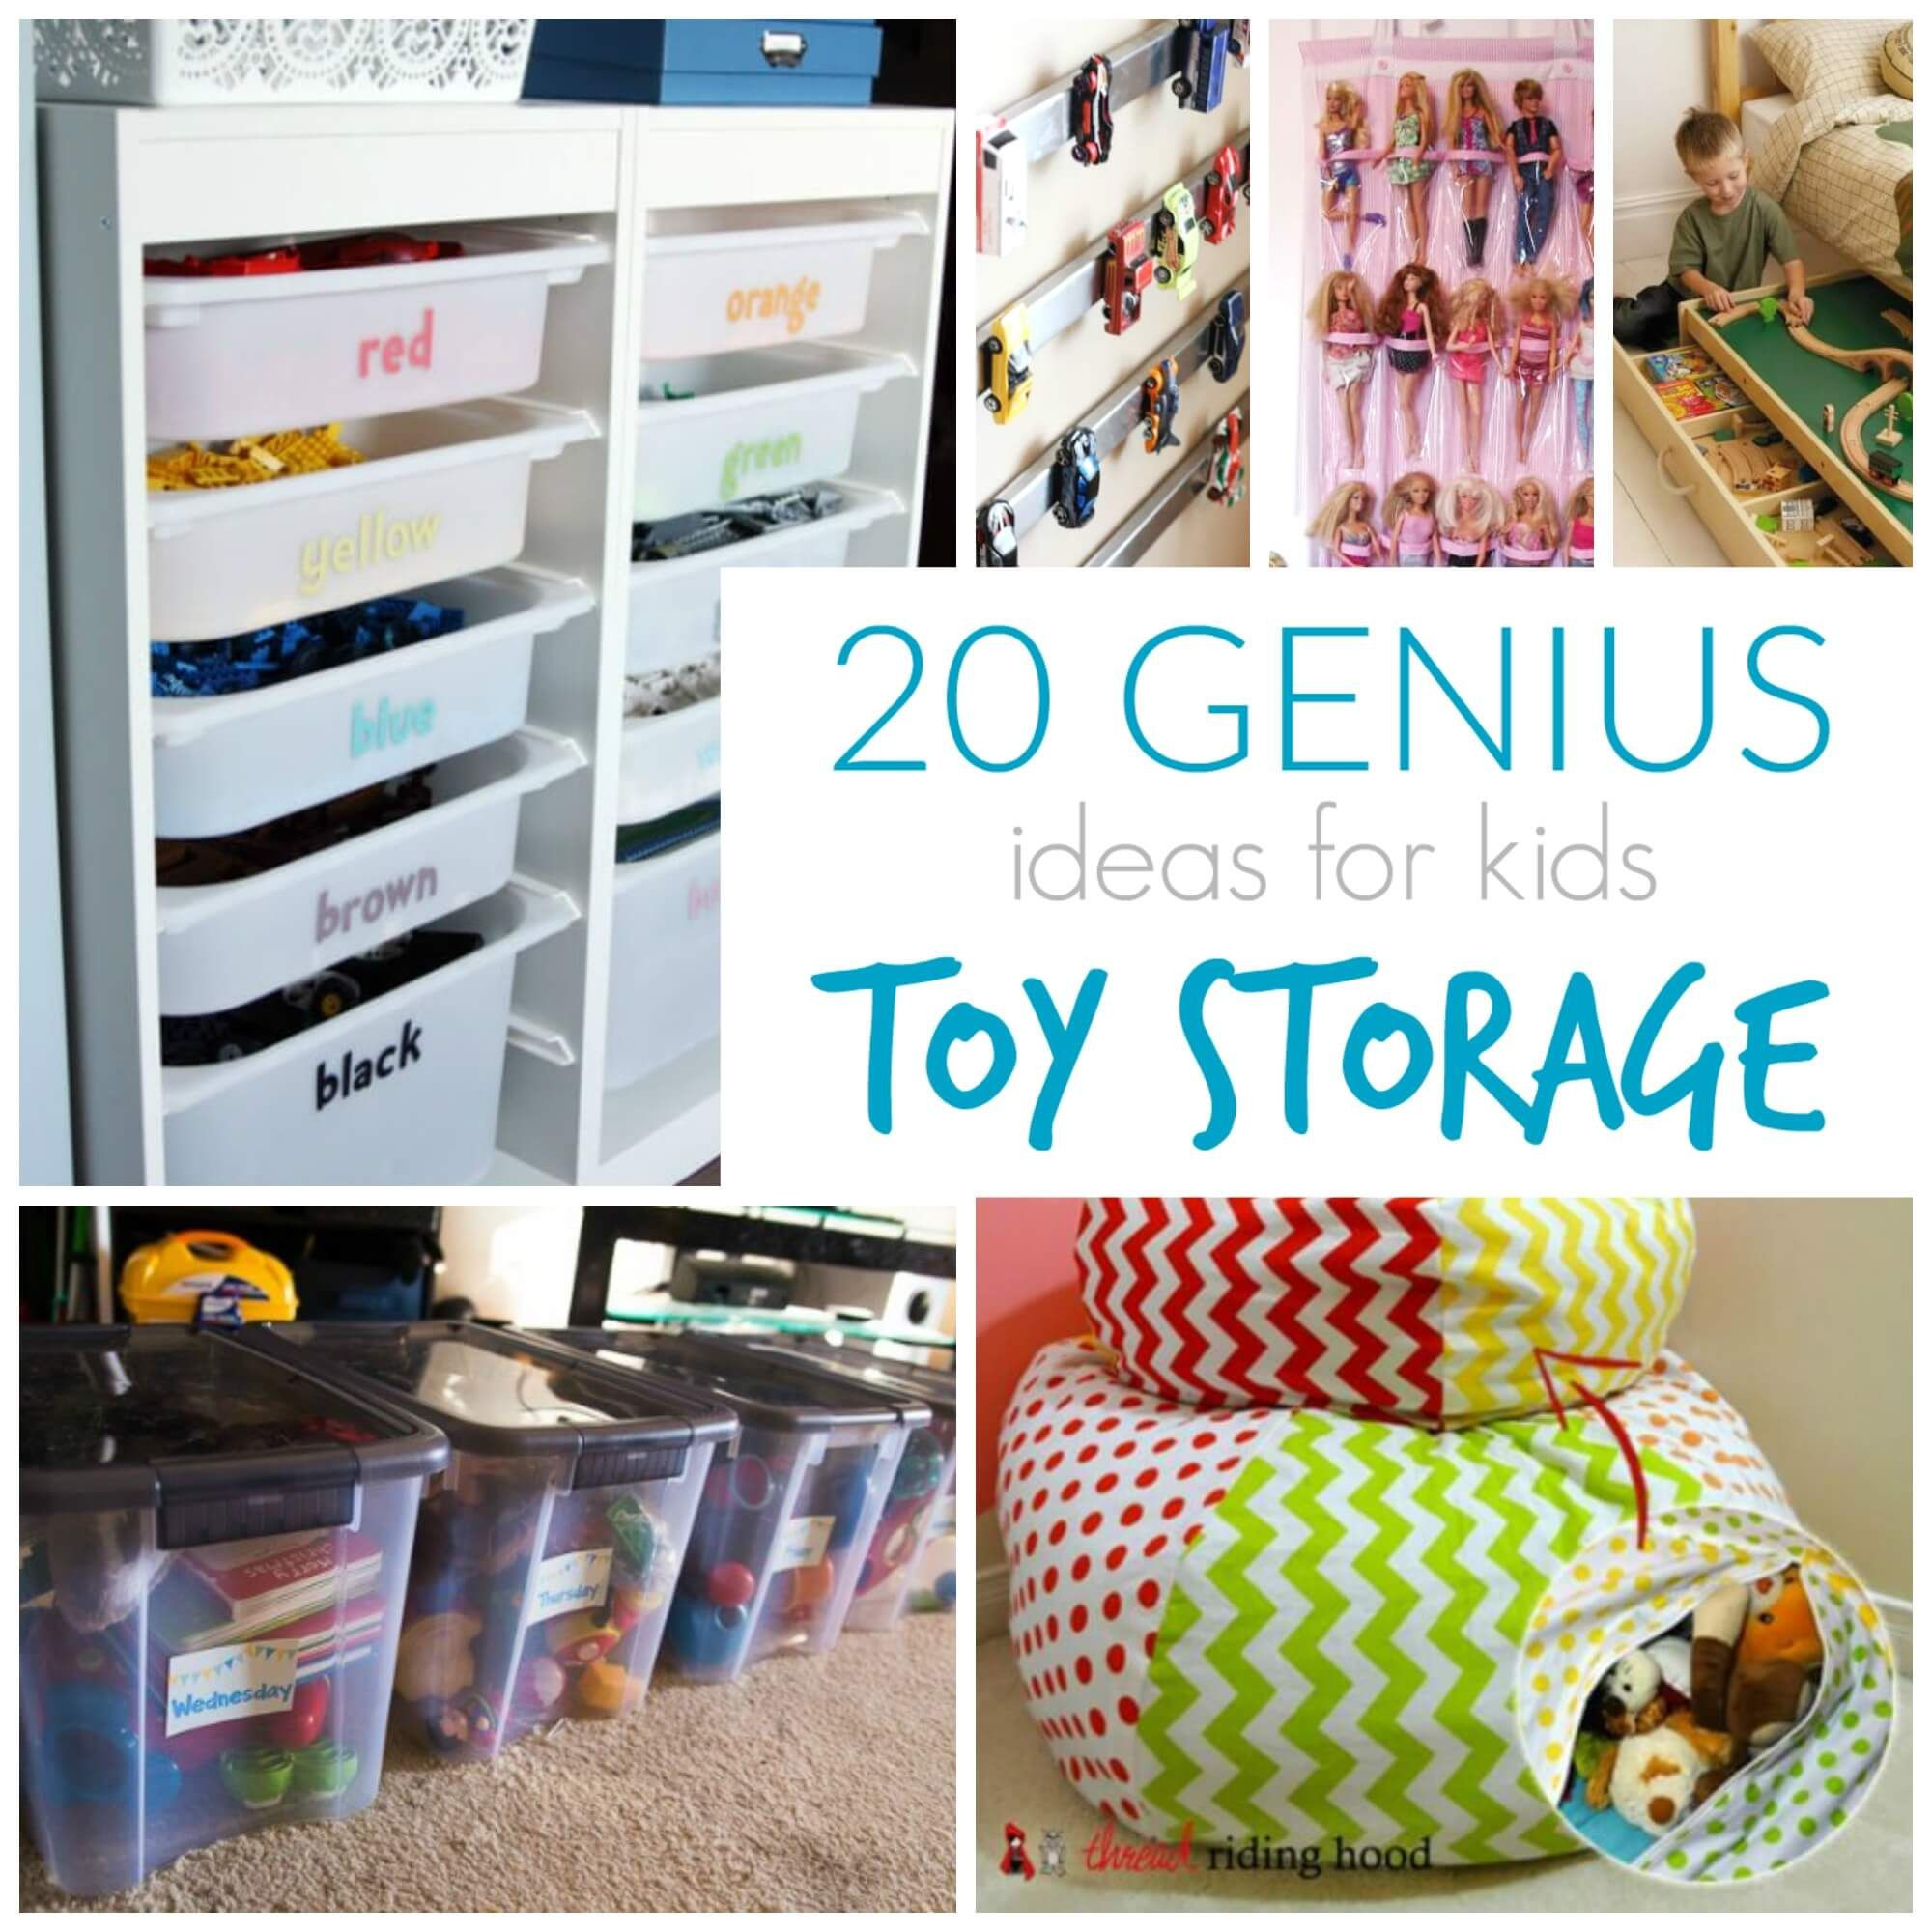 DIY Storage Ideas For Kids Rooms
 7 1 Toy Storage Ideas 2019 DIY Plans In A Small Space